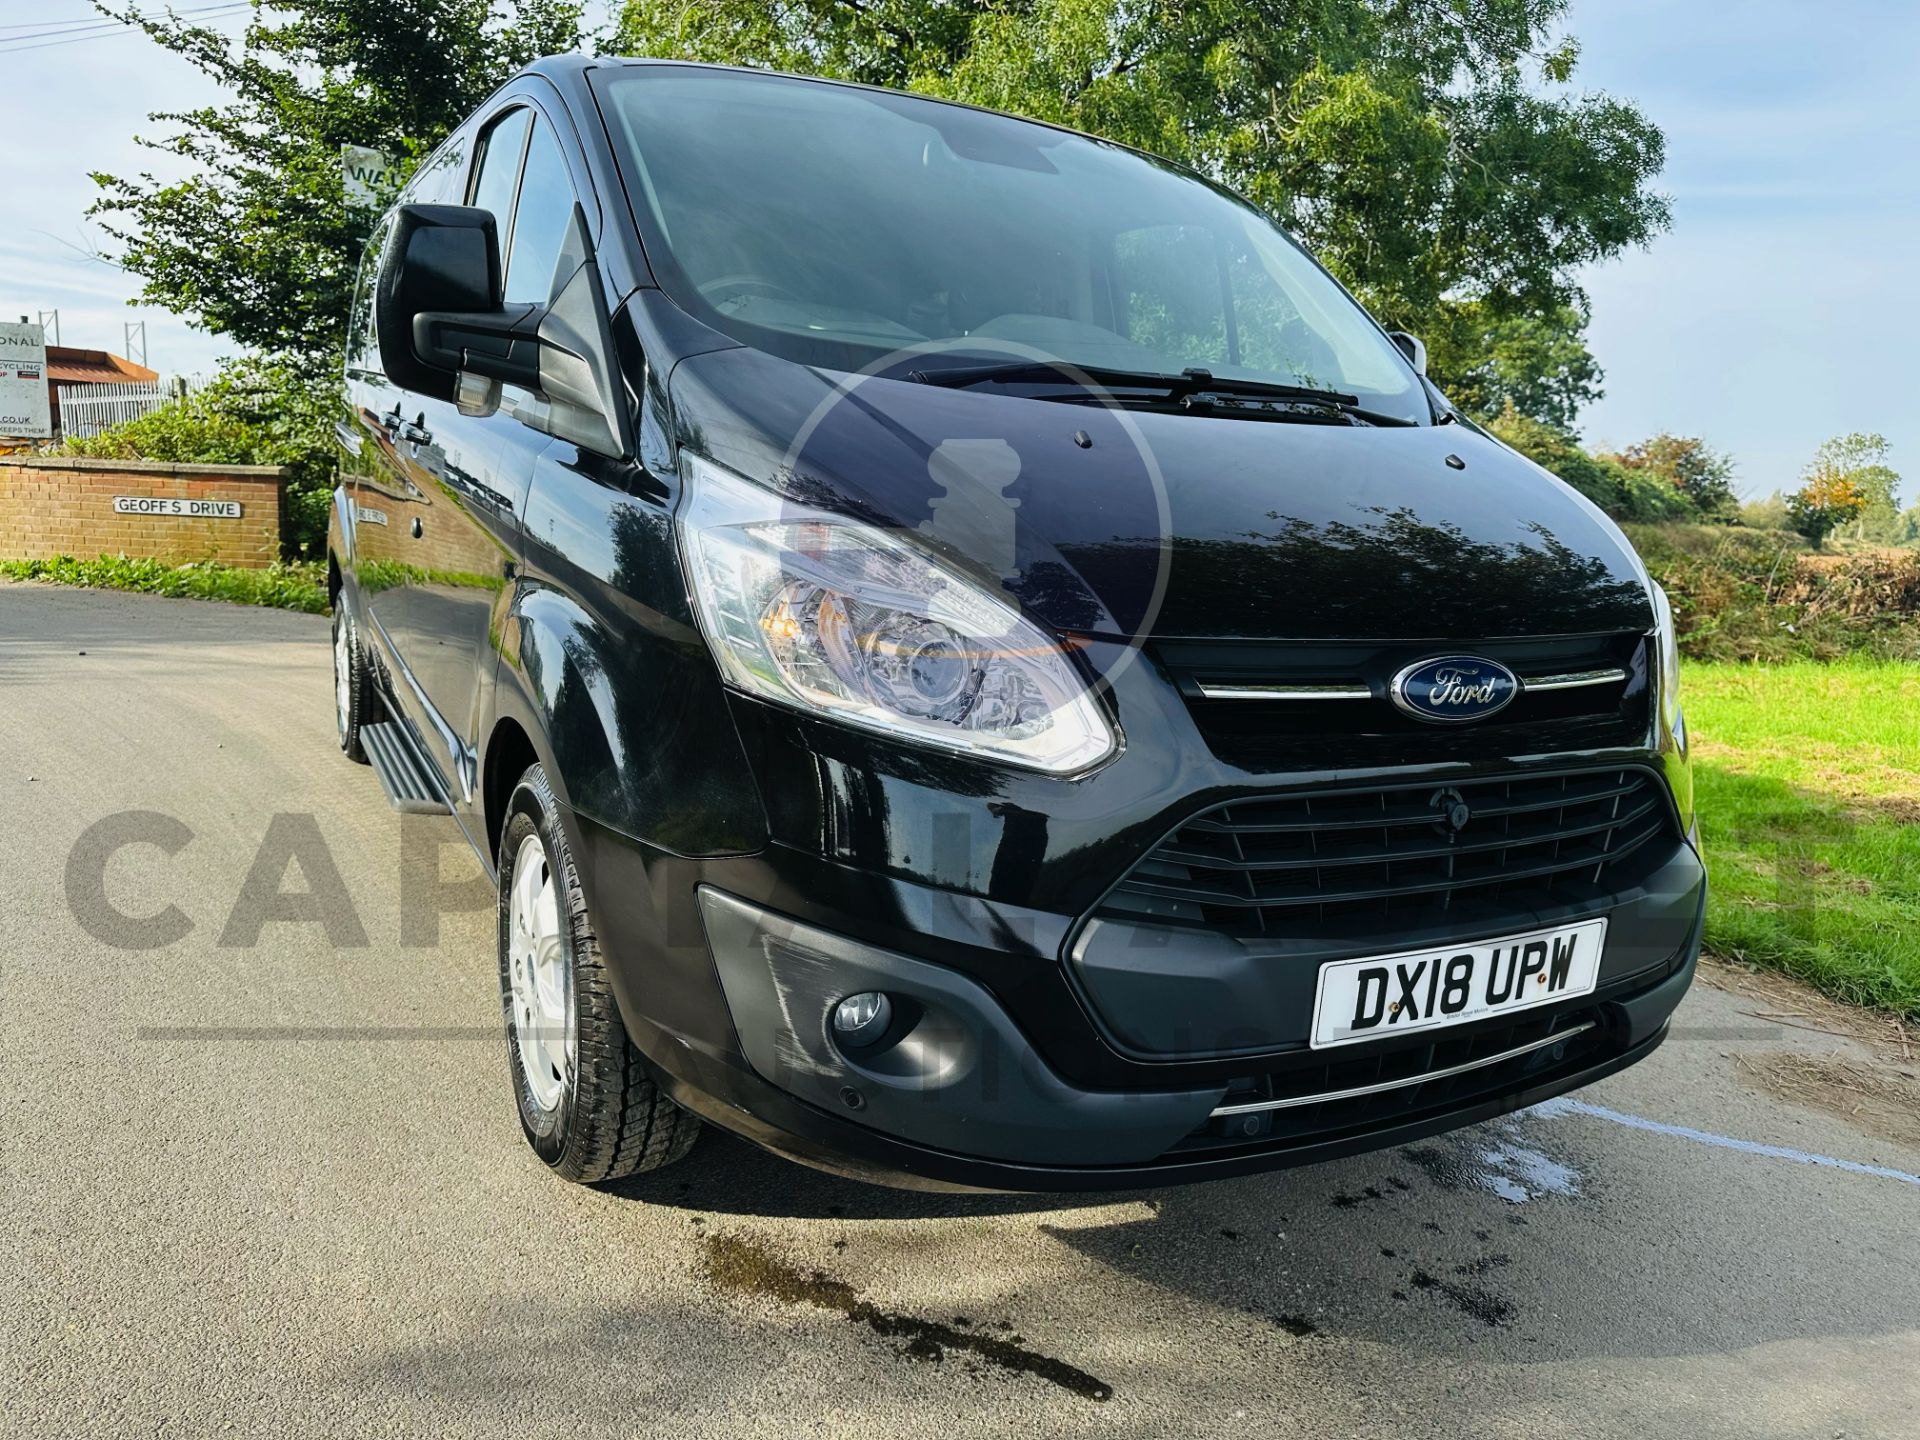 (On Sale) FORD TRANSIT TOURNEO CUSTOM *LWB 9 SEATER BUS* (2018 - EURO 6) 2.0 TDCI - AUTO (1 OWNER) - Image 3 of 42